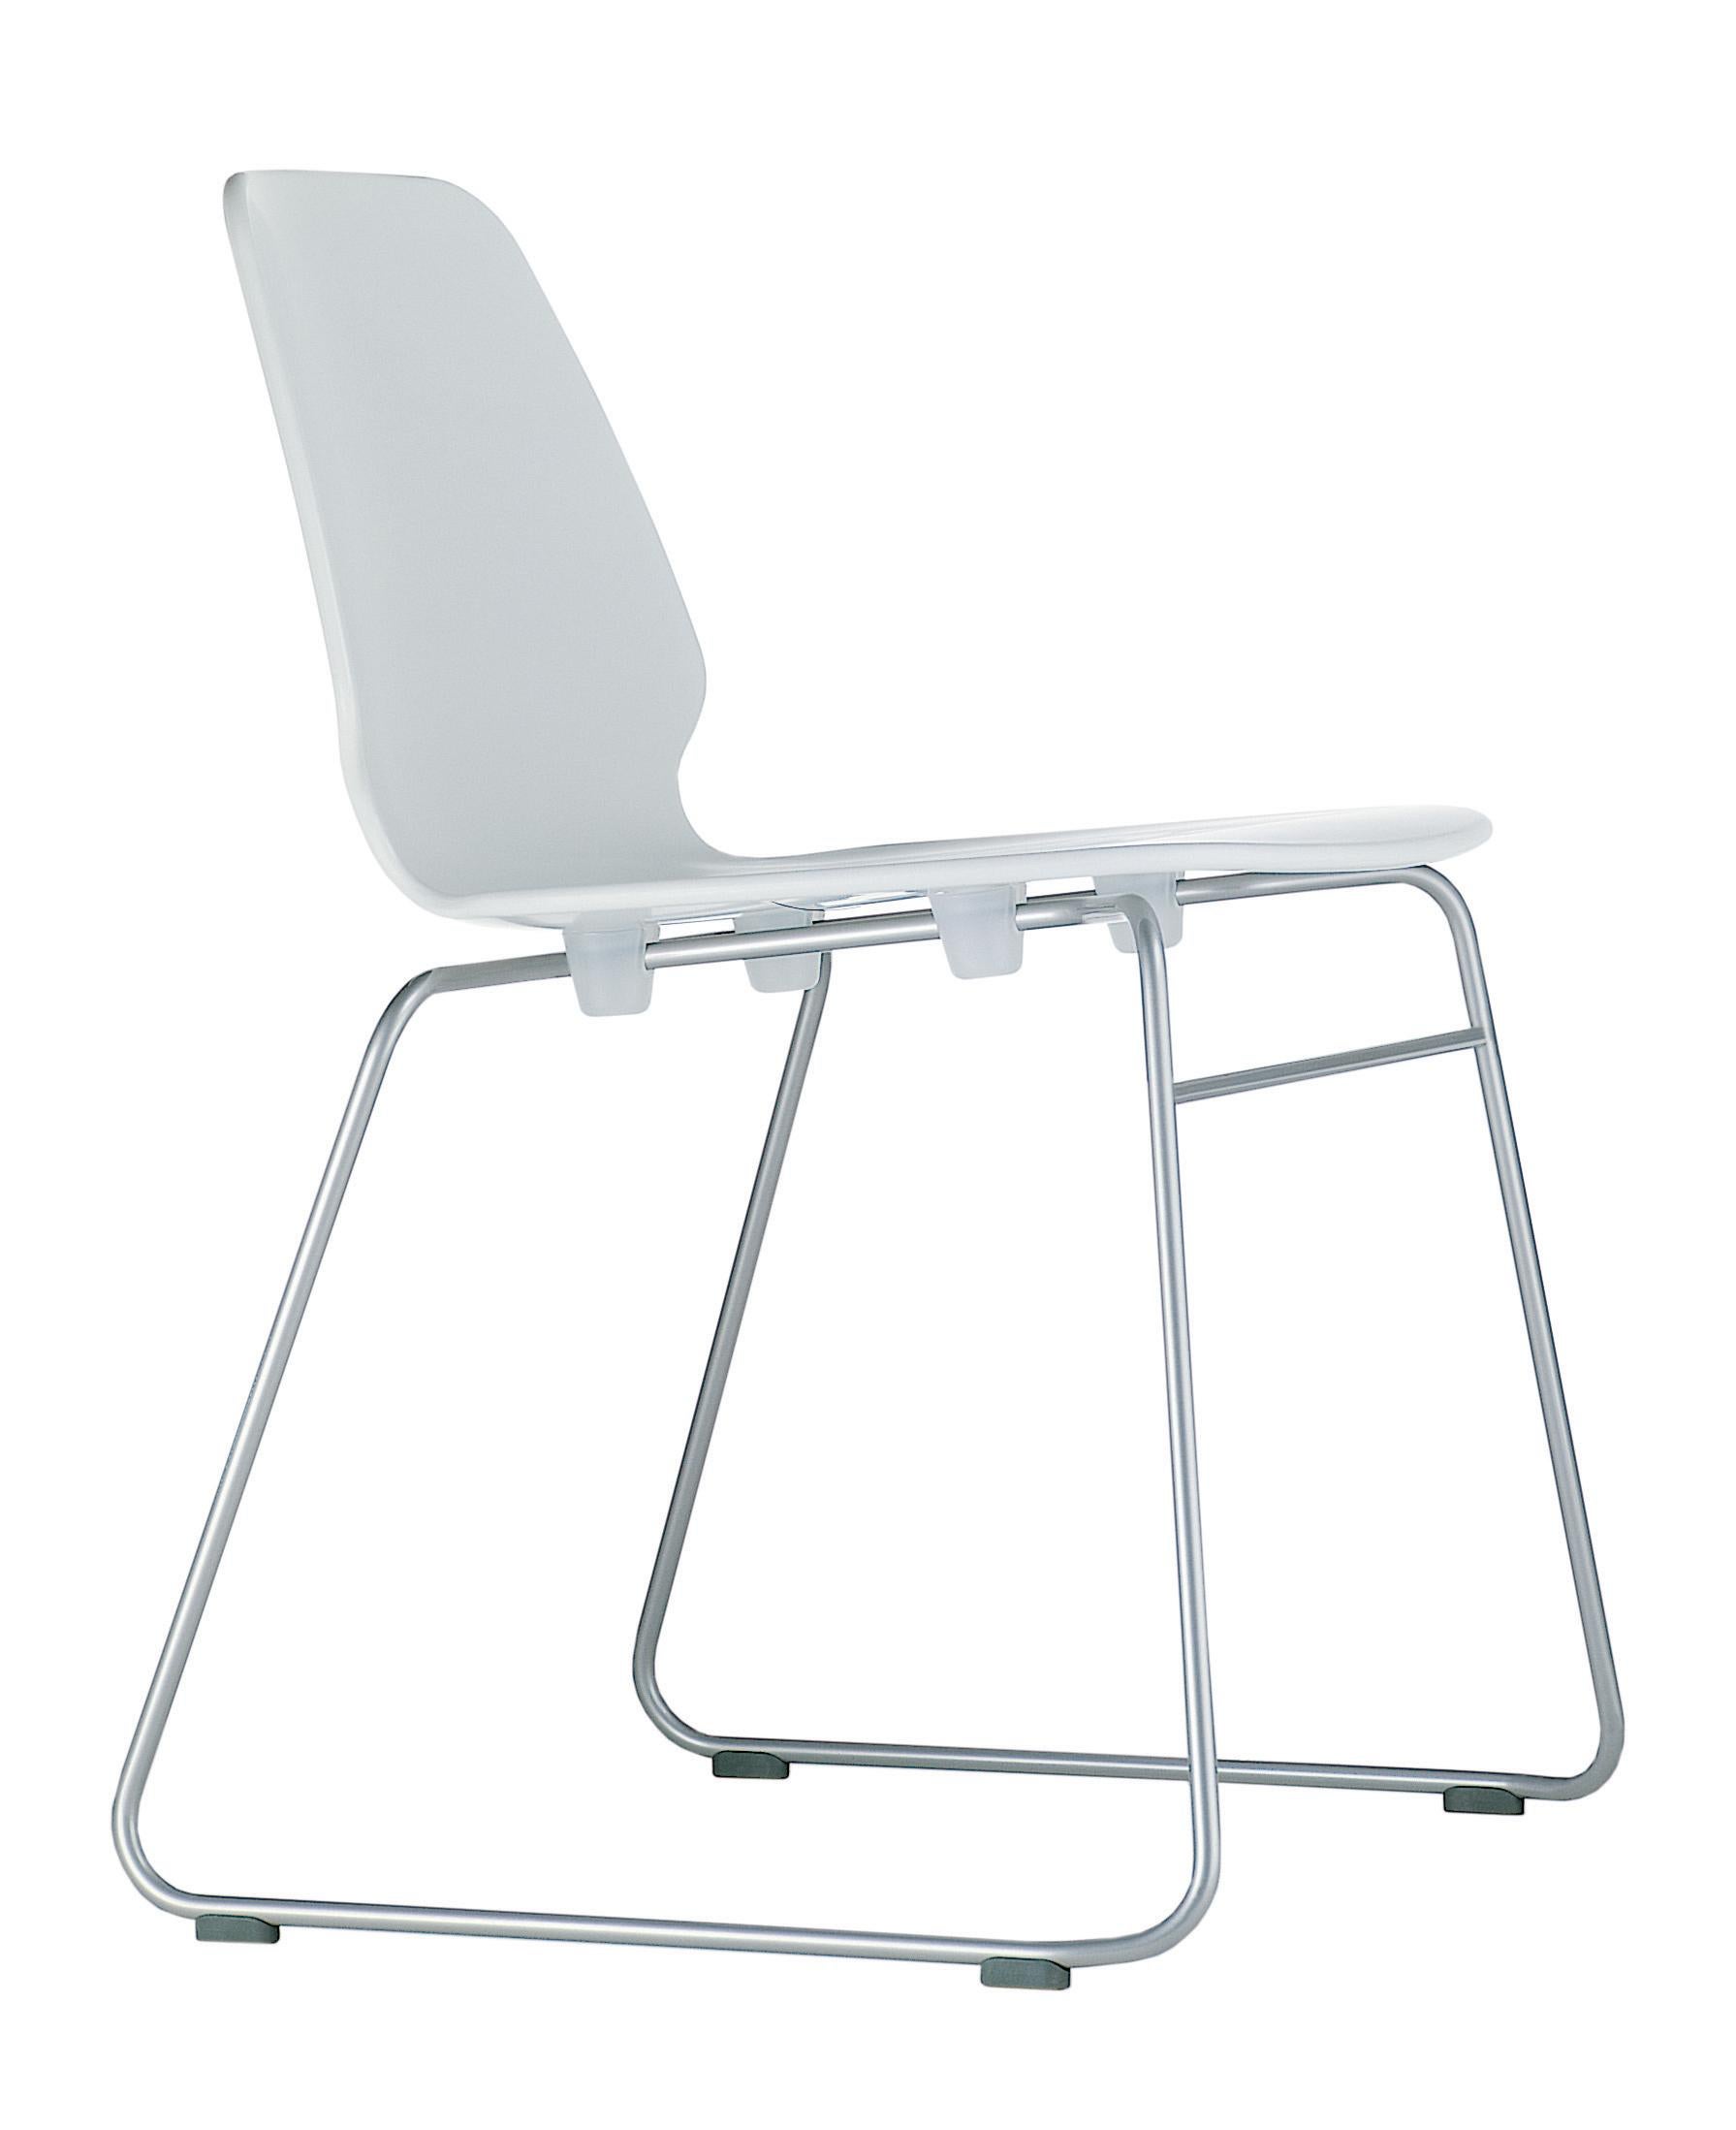 Italian Alias 531 Selinunte Sledge Chair in White and Steel Frame by Alfredo Häberli For Sale